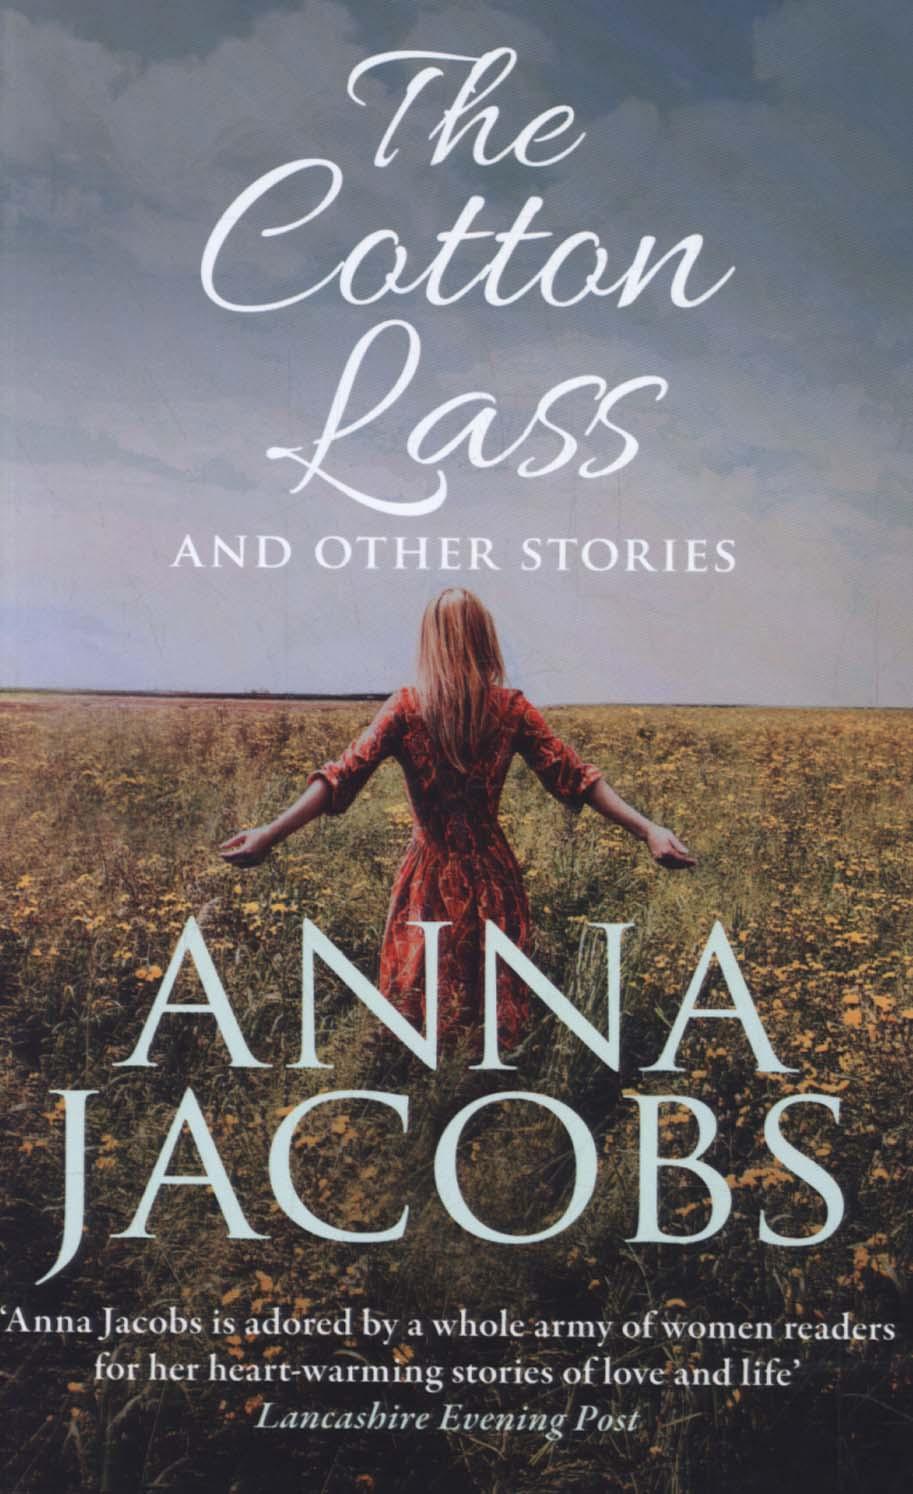 Cotton Lass and Other Stories - Anna Jacobs